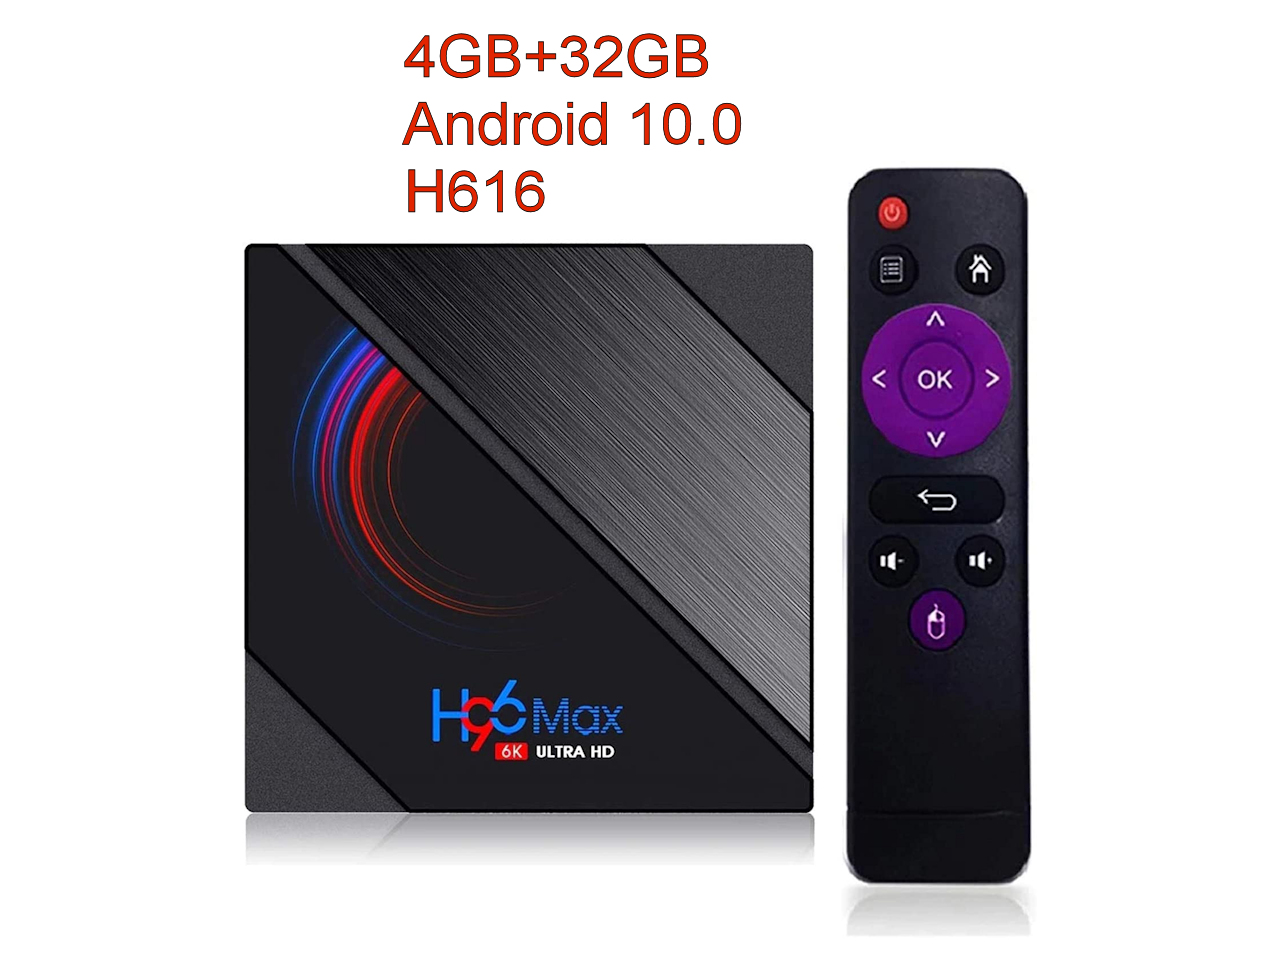 Android TV H96 MaxH 32